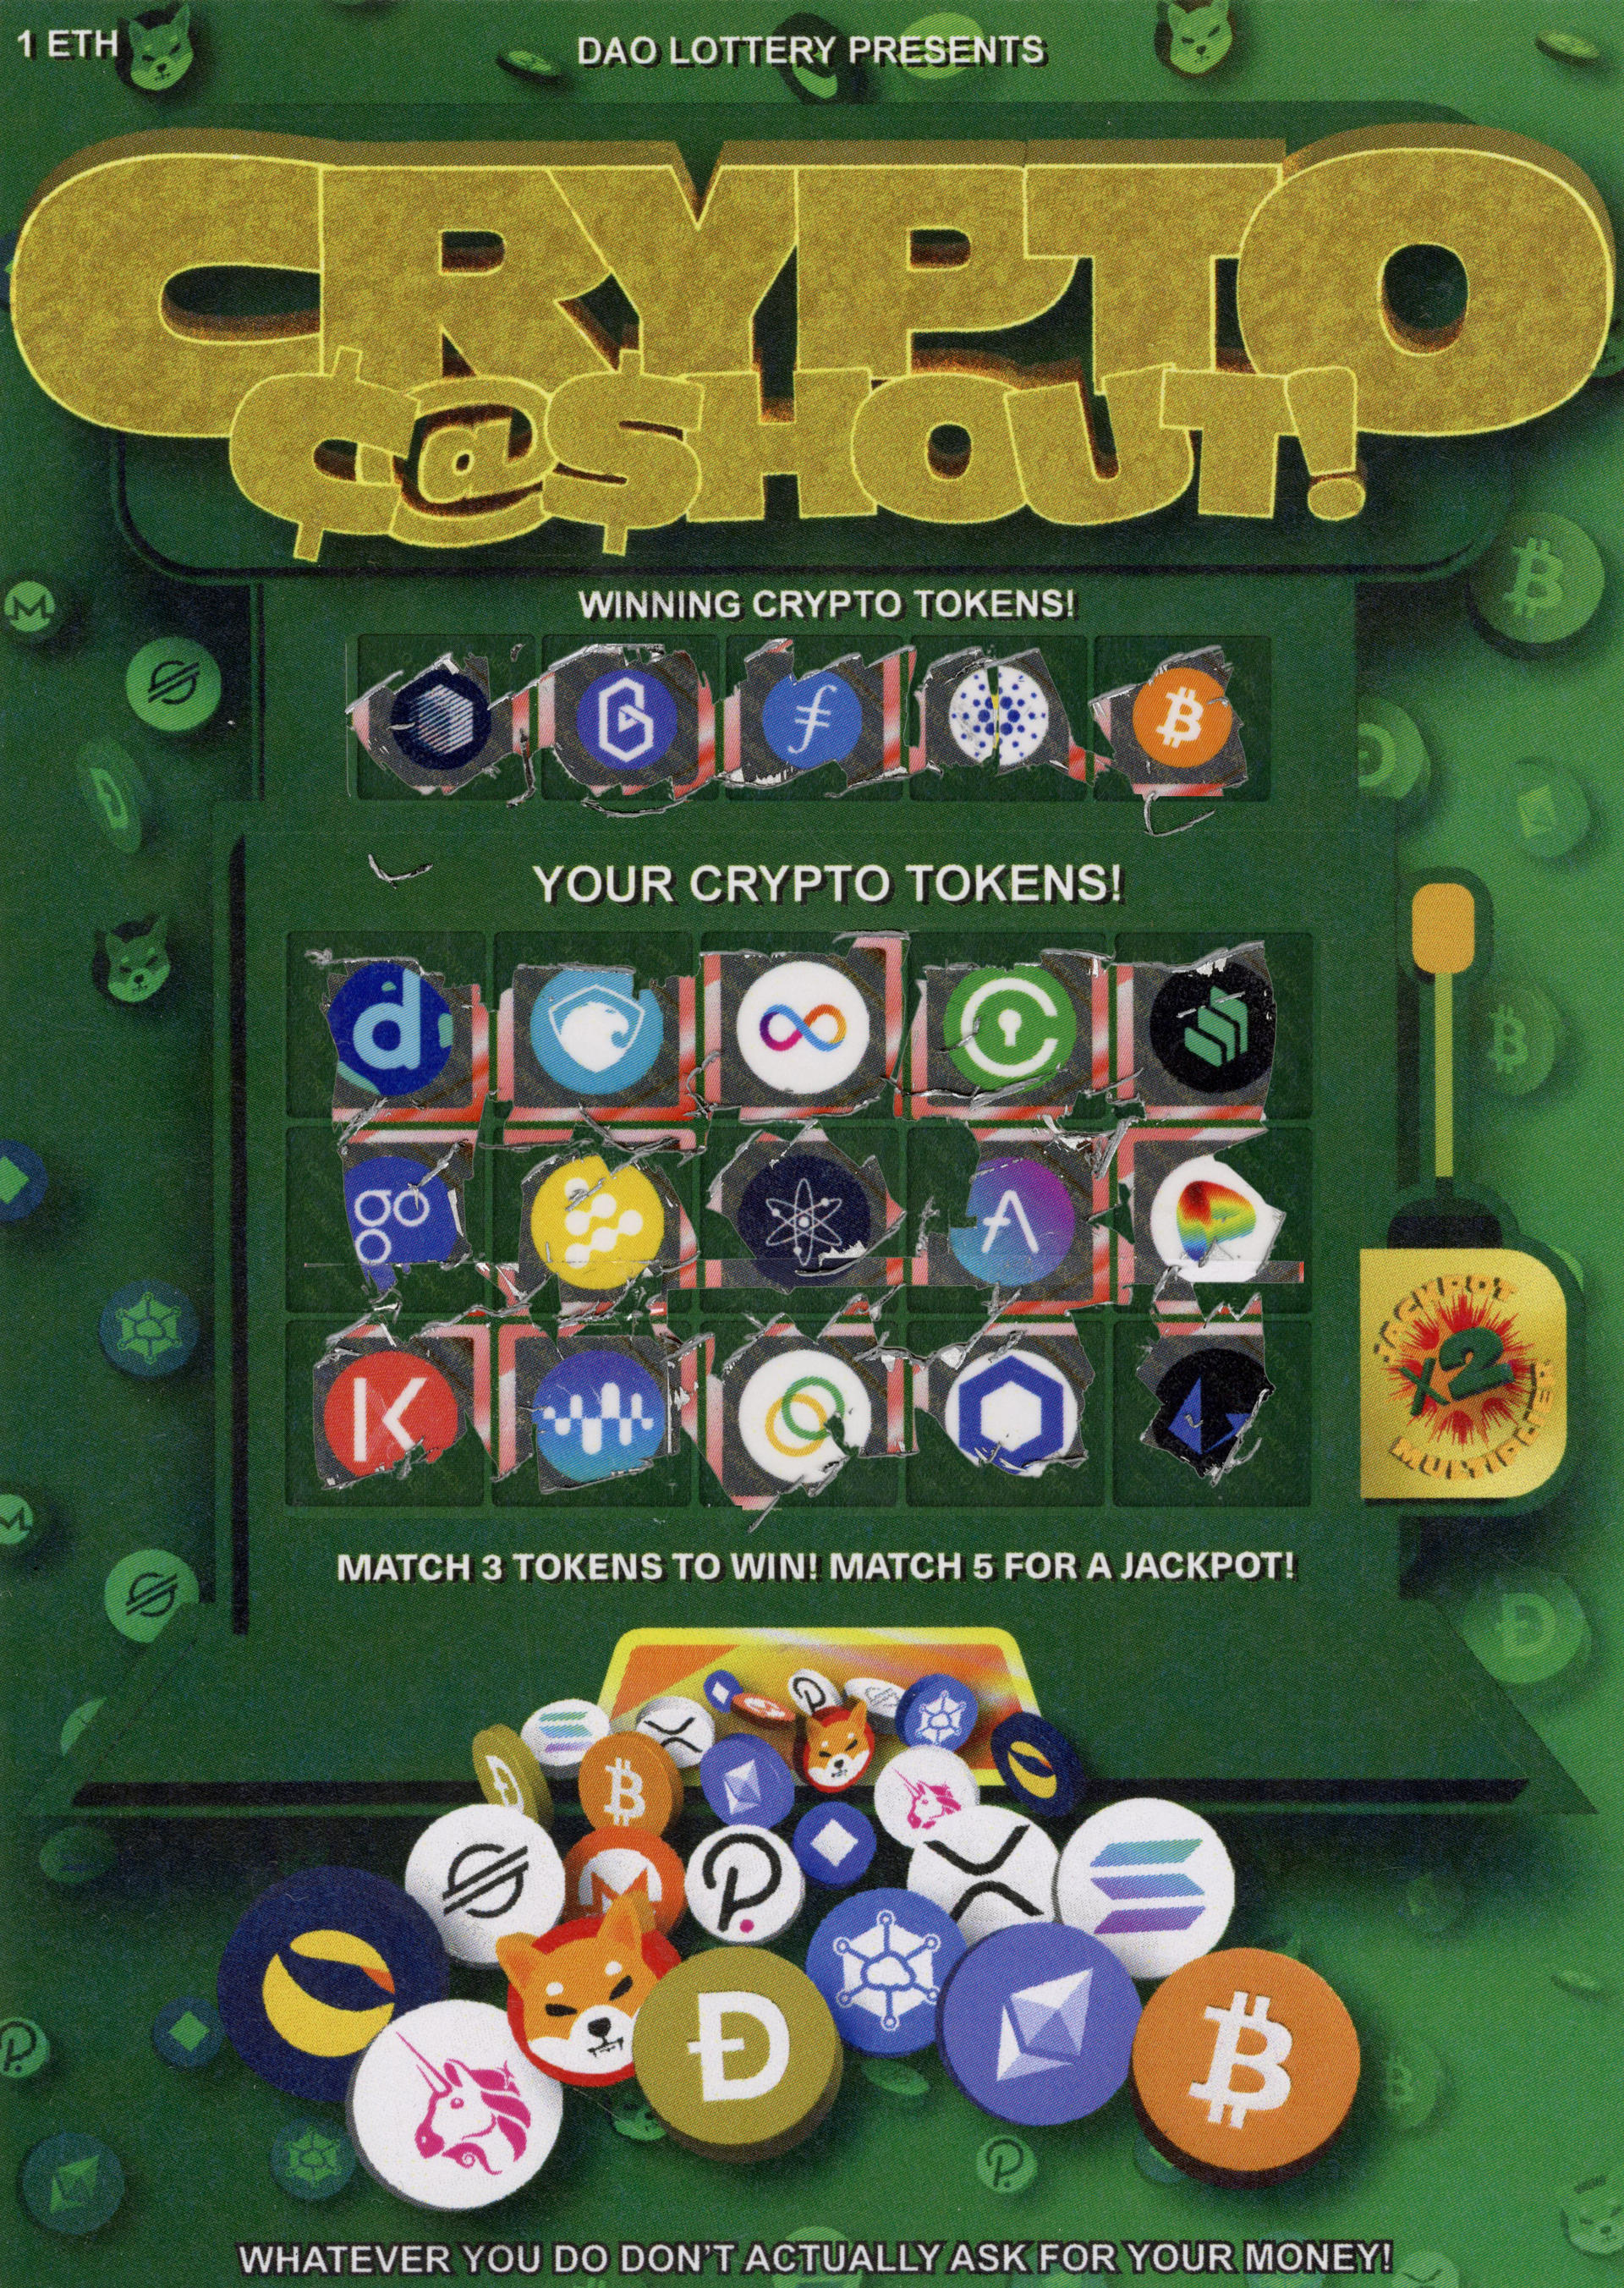 A scratch off lottery ticket depicting a slot machine with cryptocurrency logos.